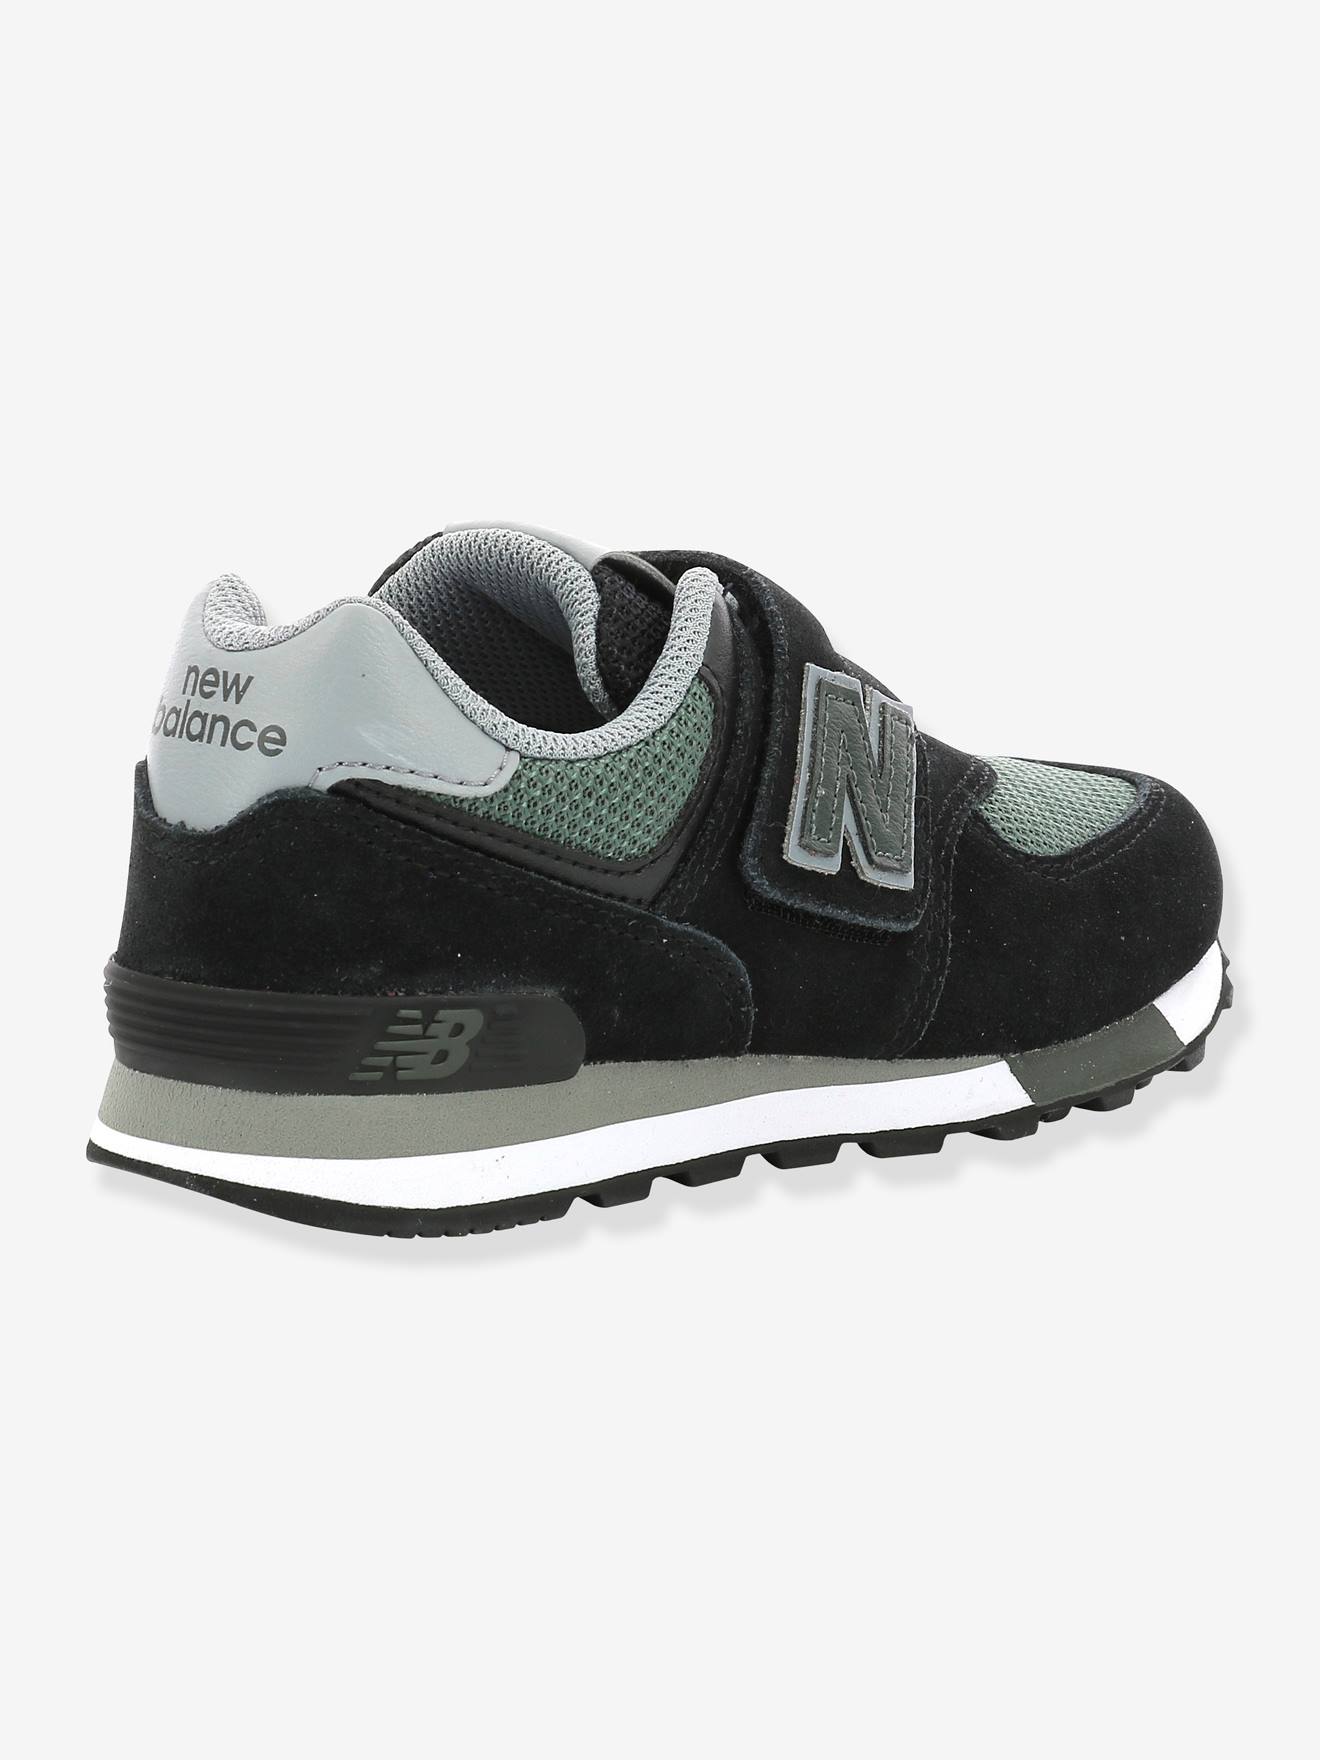 new balance personnalisable Cheaper Than Retail Price> Buy ...